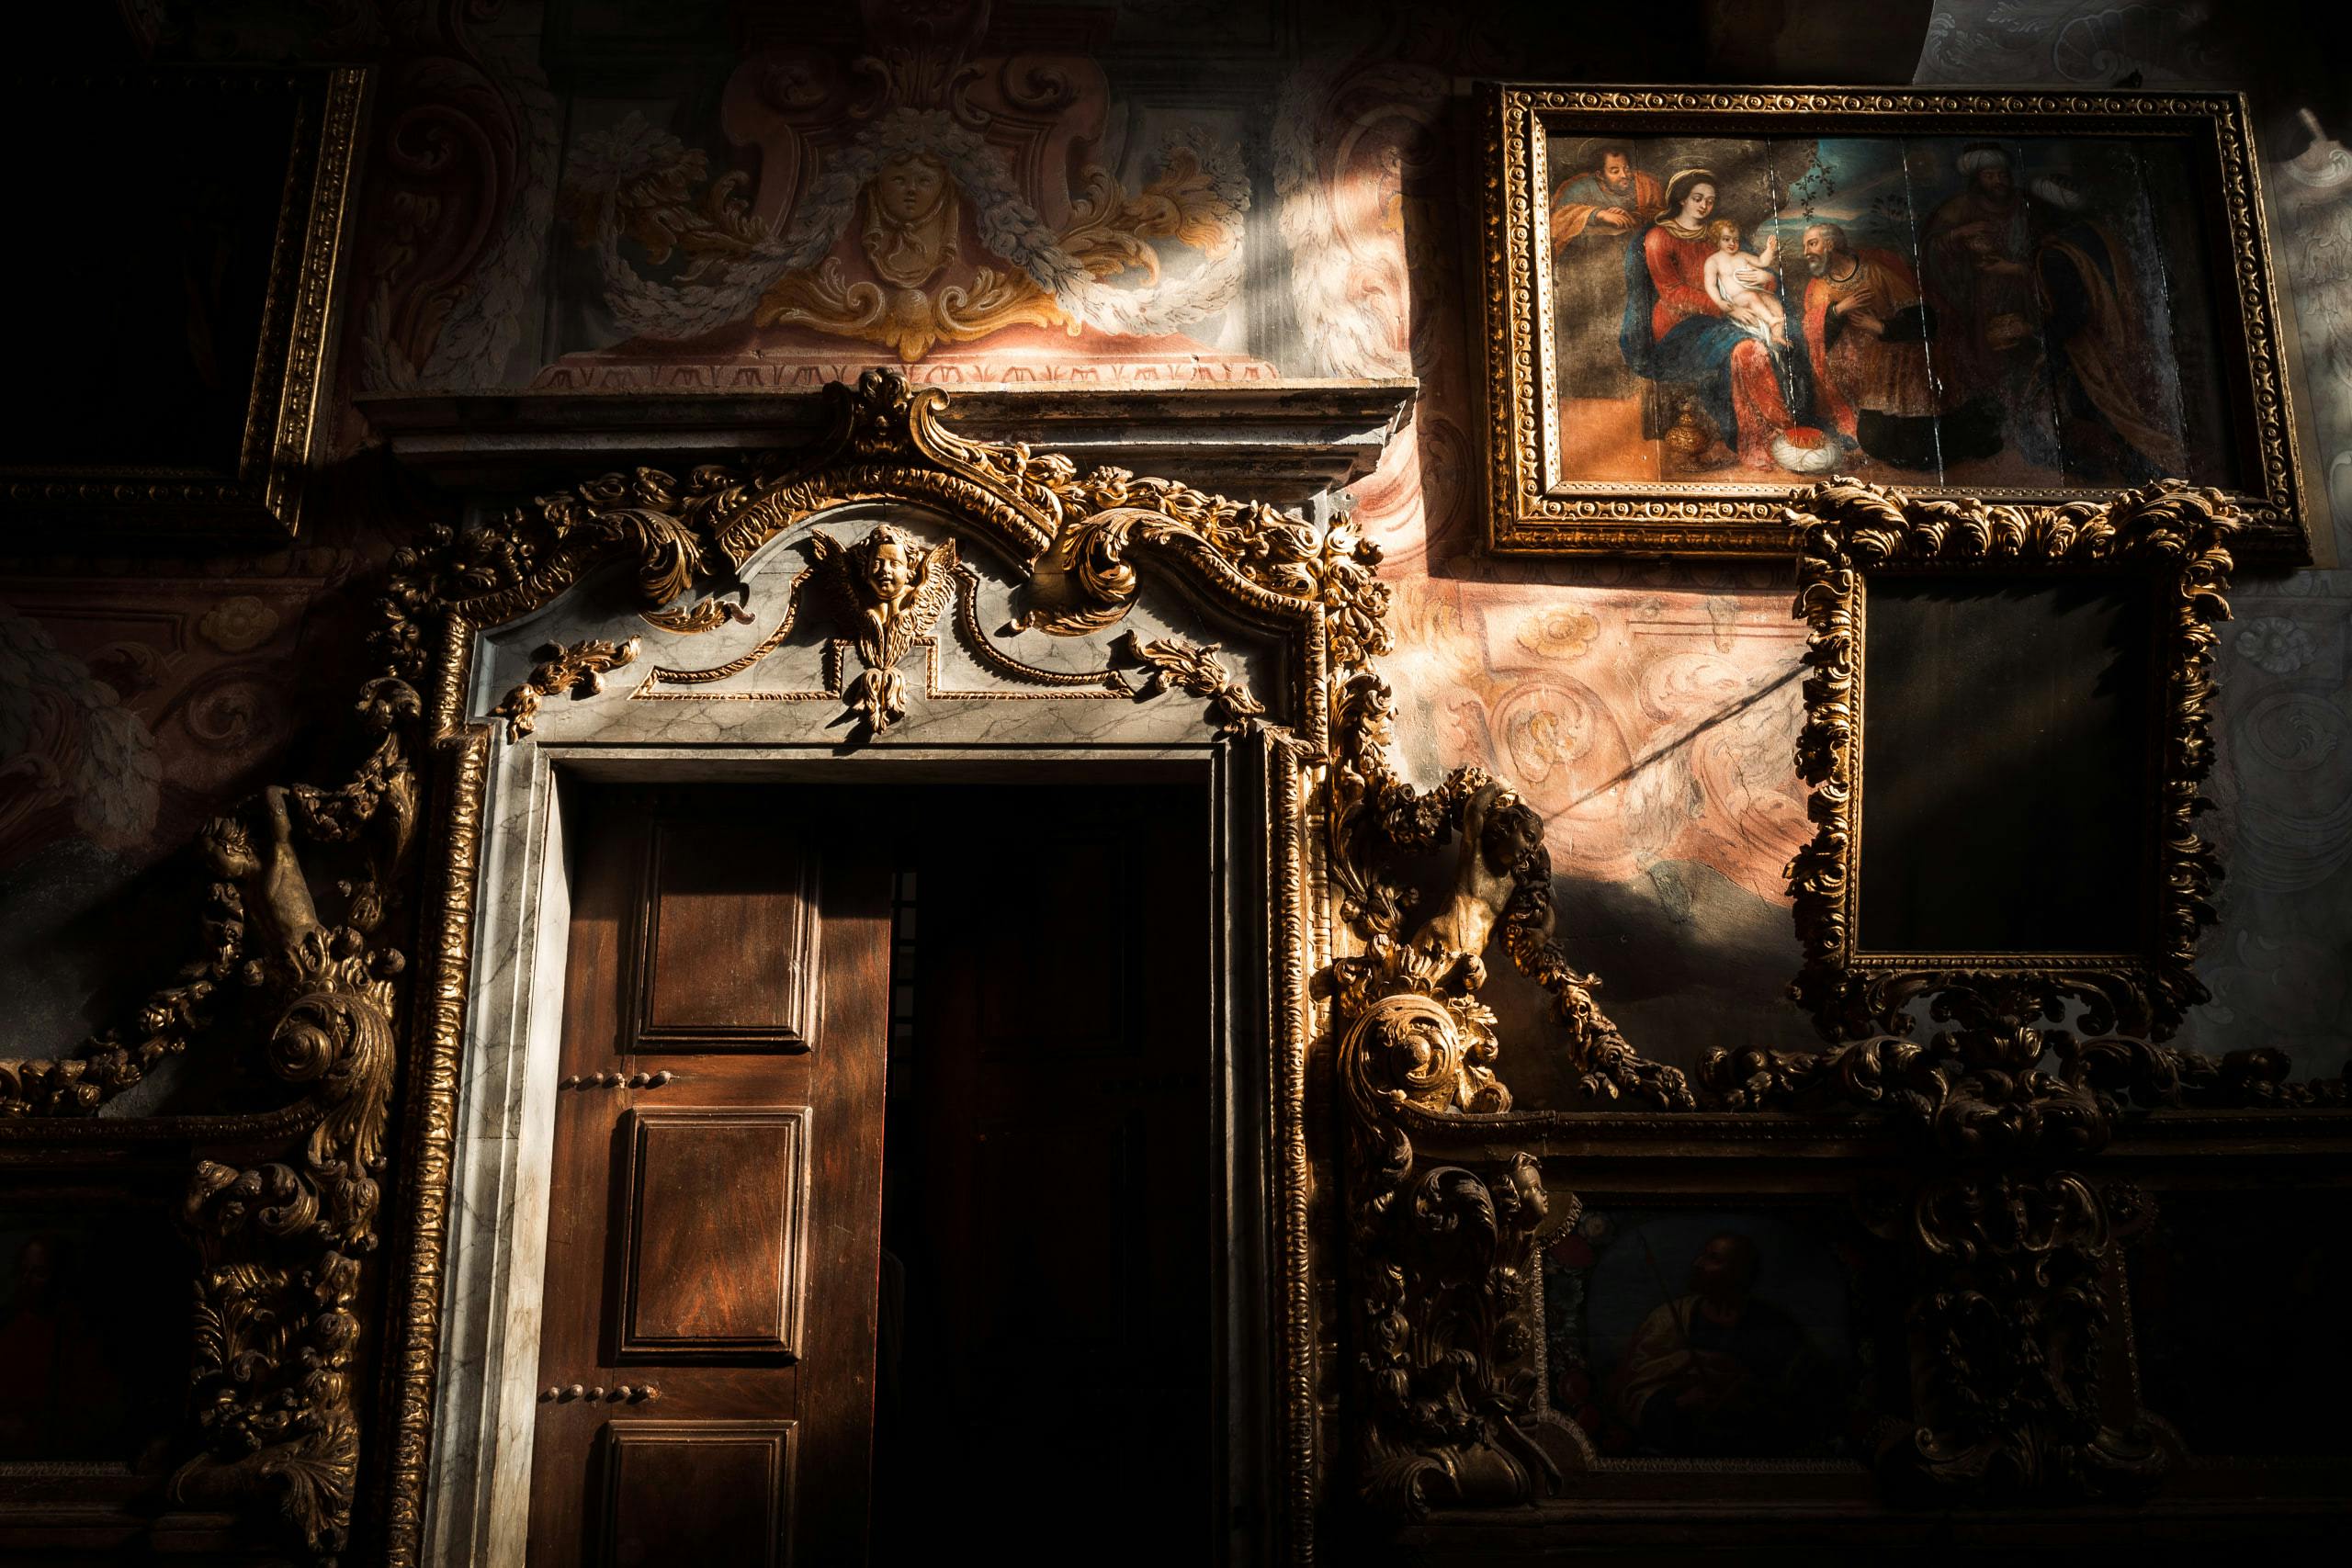 Gallery wall with ornate paintings on the wall, a large door, and a dramatic lighting